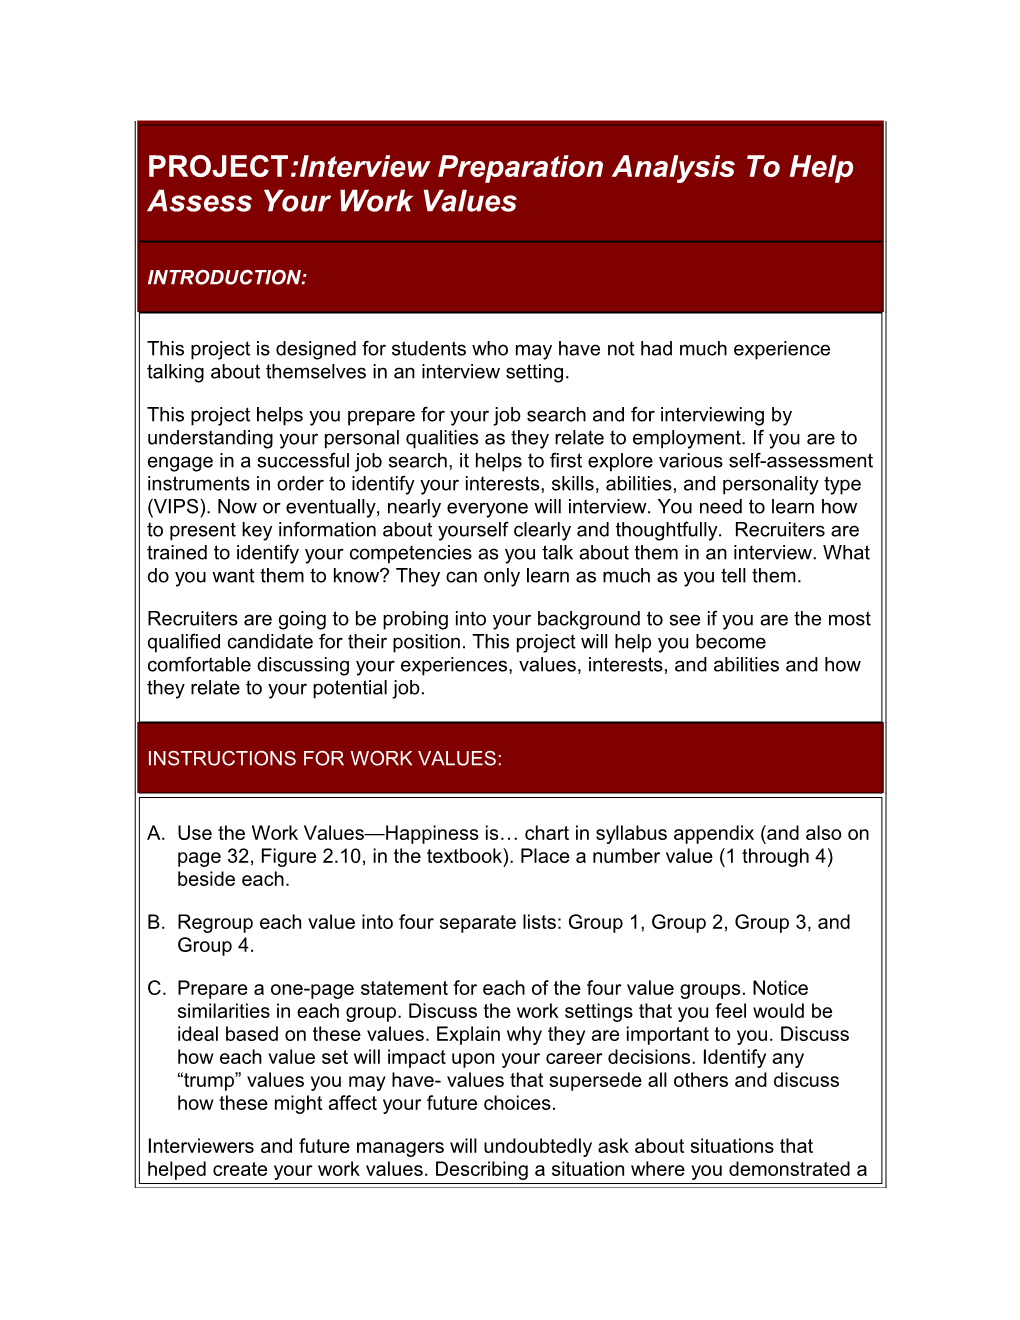 PROJECT:Interview Preparation Analysis to Help Assess Your Work Values